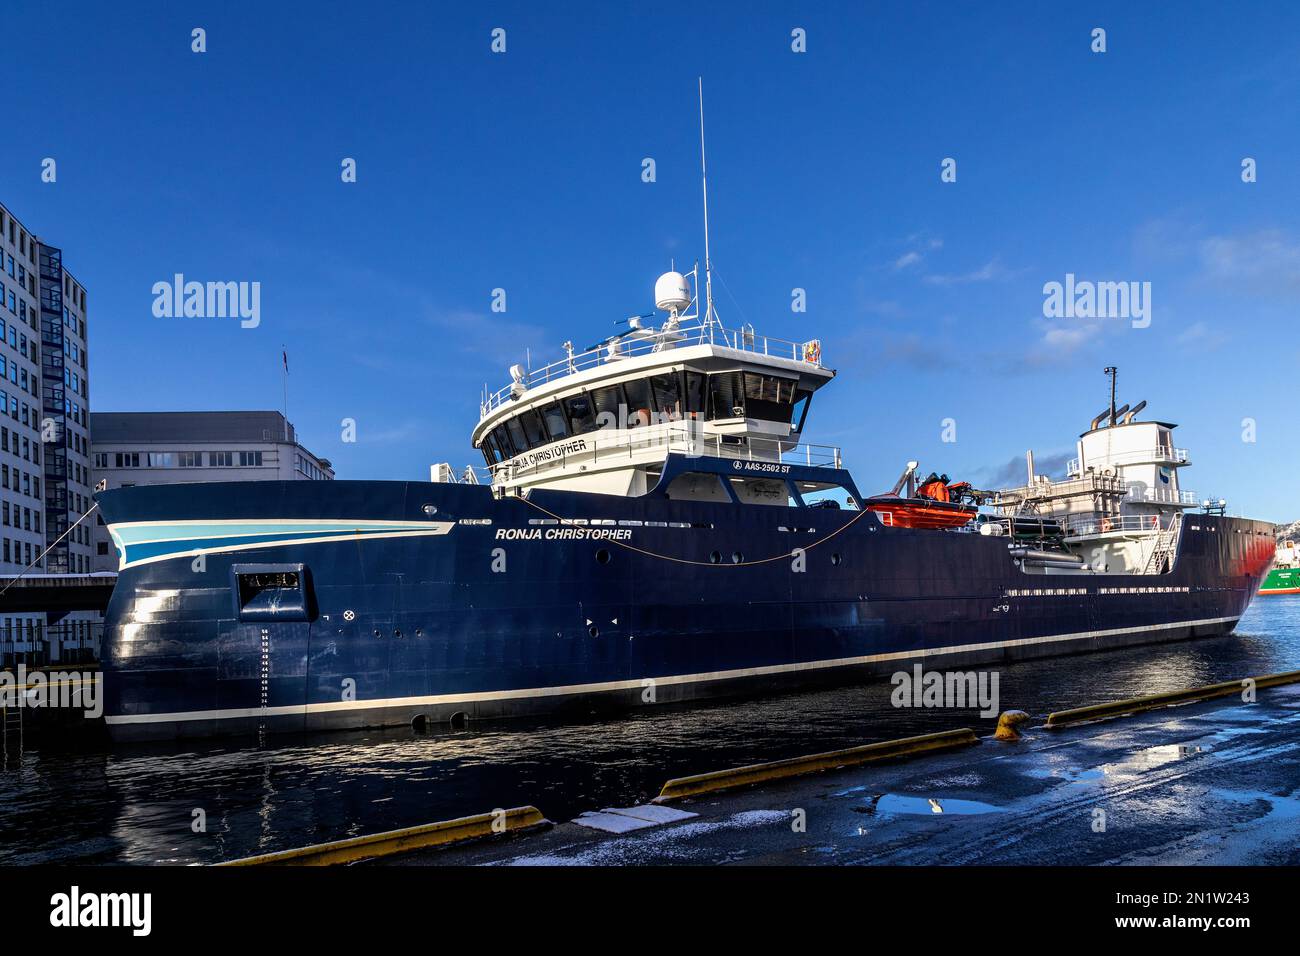 Wellboat Ronja Christopher at quay, in the port of Bergen, Norway. Stock Photo